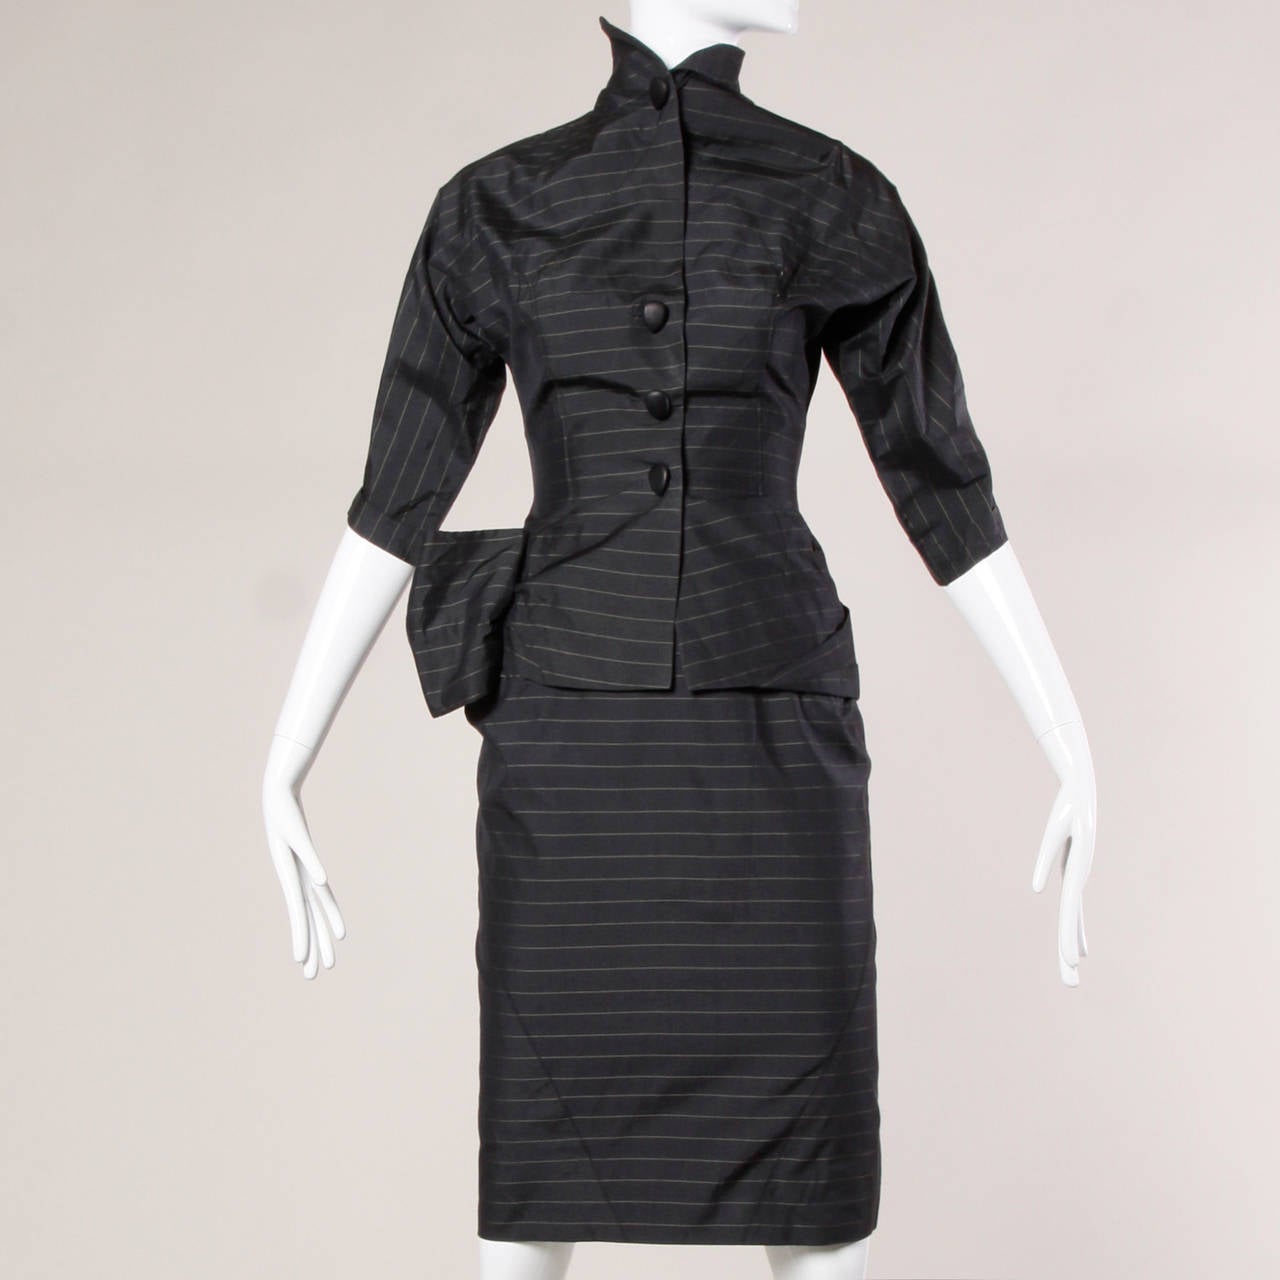 1940s Vintage Couture Silk & Wool Pin Striped Jacket + Skirt Suit Ensemble In Excellent Condition For Sale In Sparks, NV